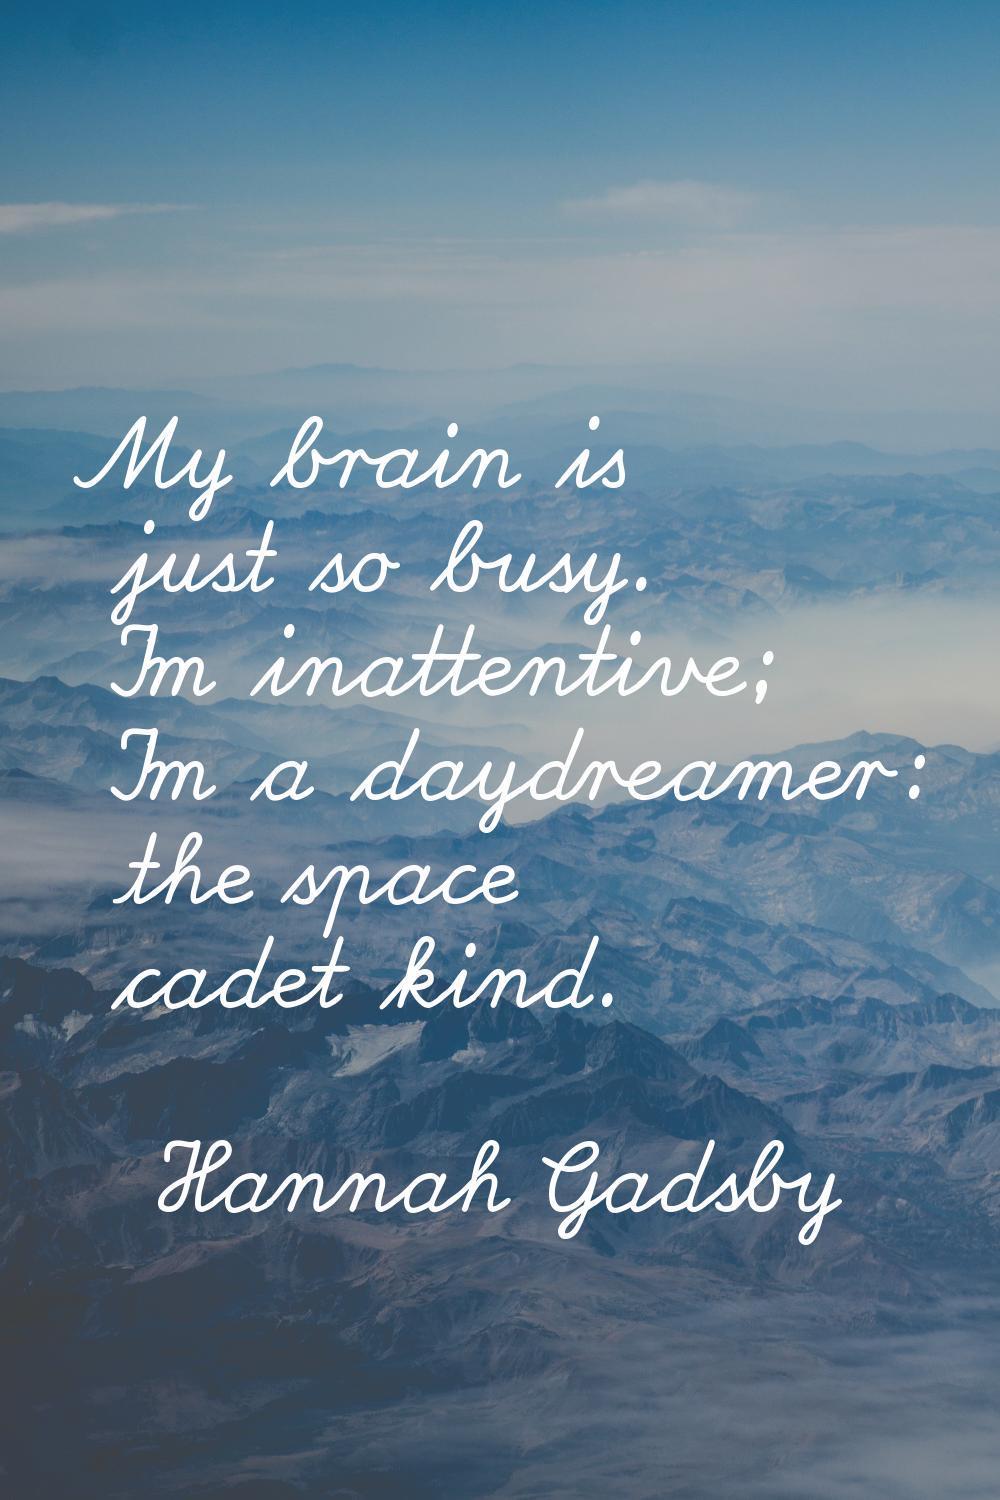 My brain is just so busy. I'm inattentive; I'm a daydreamer: the space cadet kind.